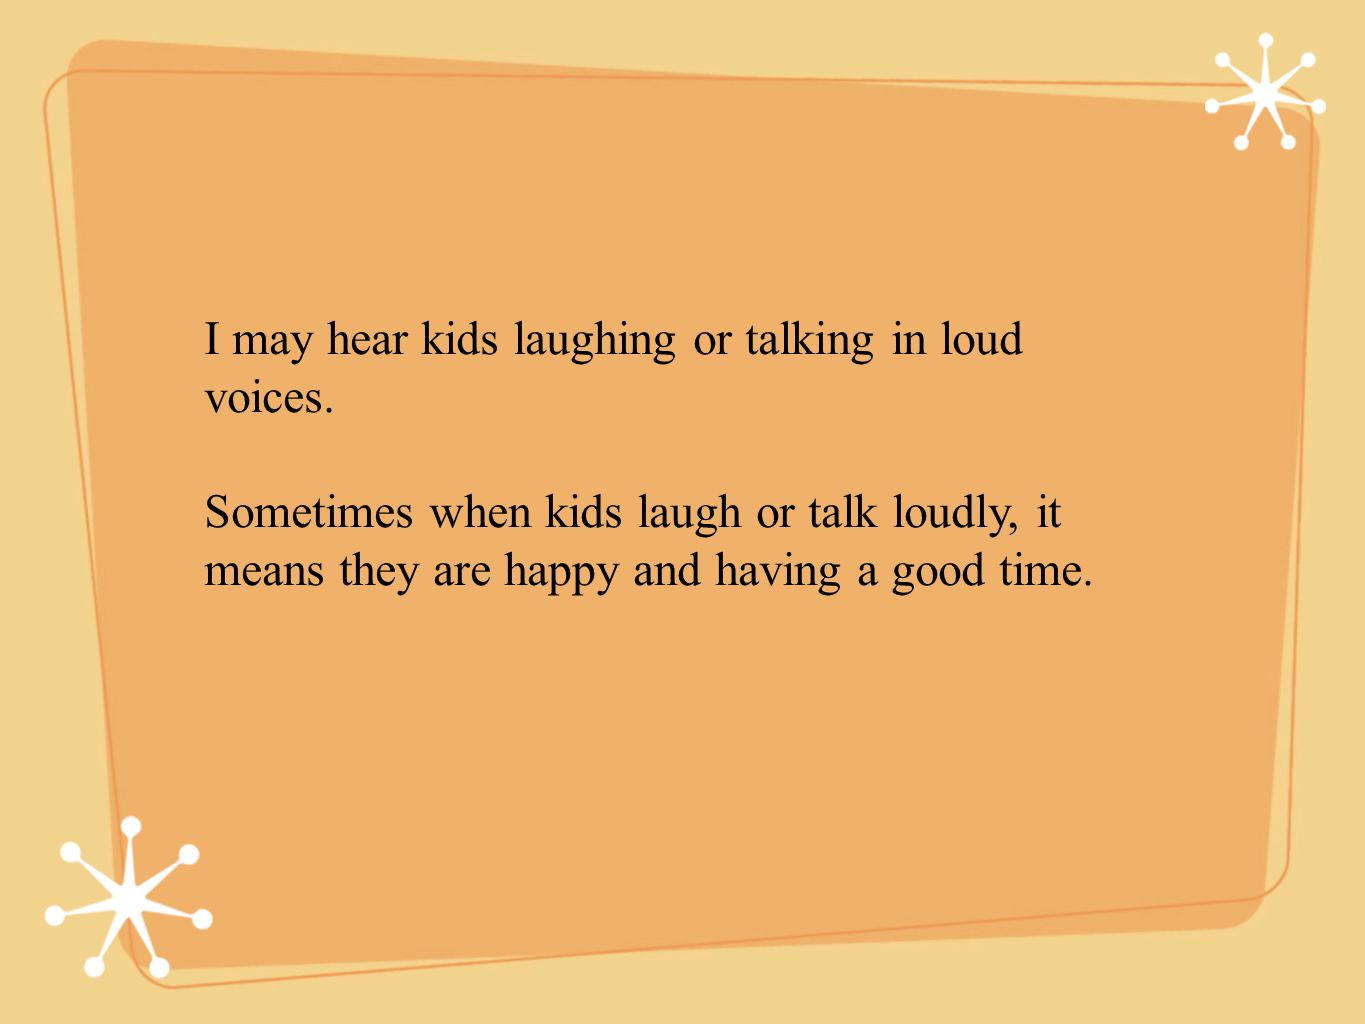 I may hear kids laughing or talking in loud voices.